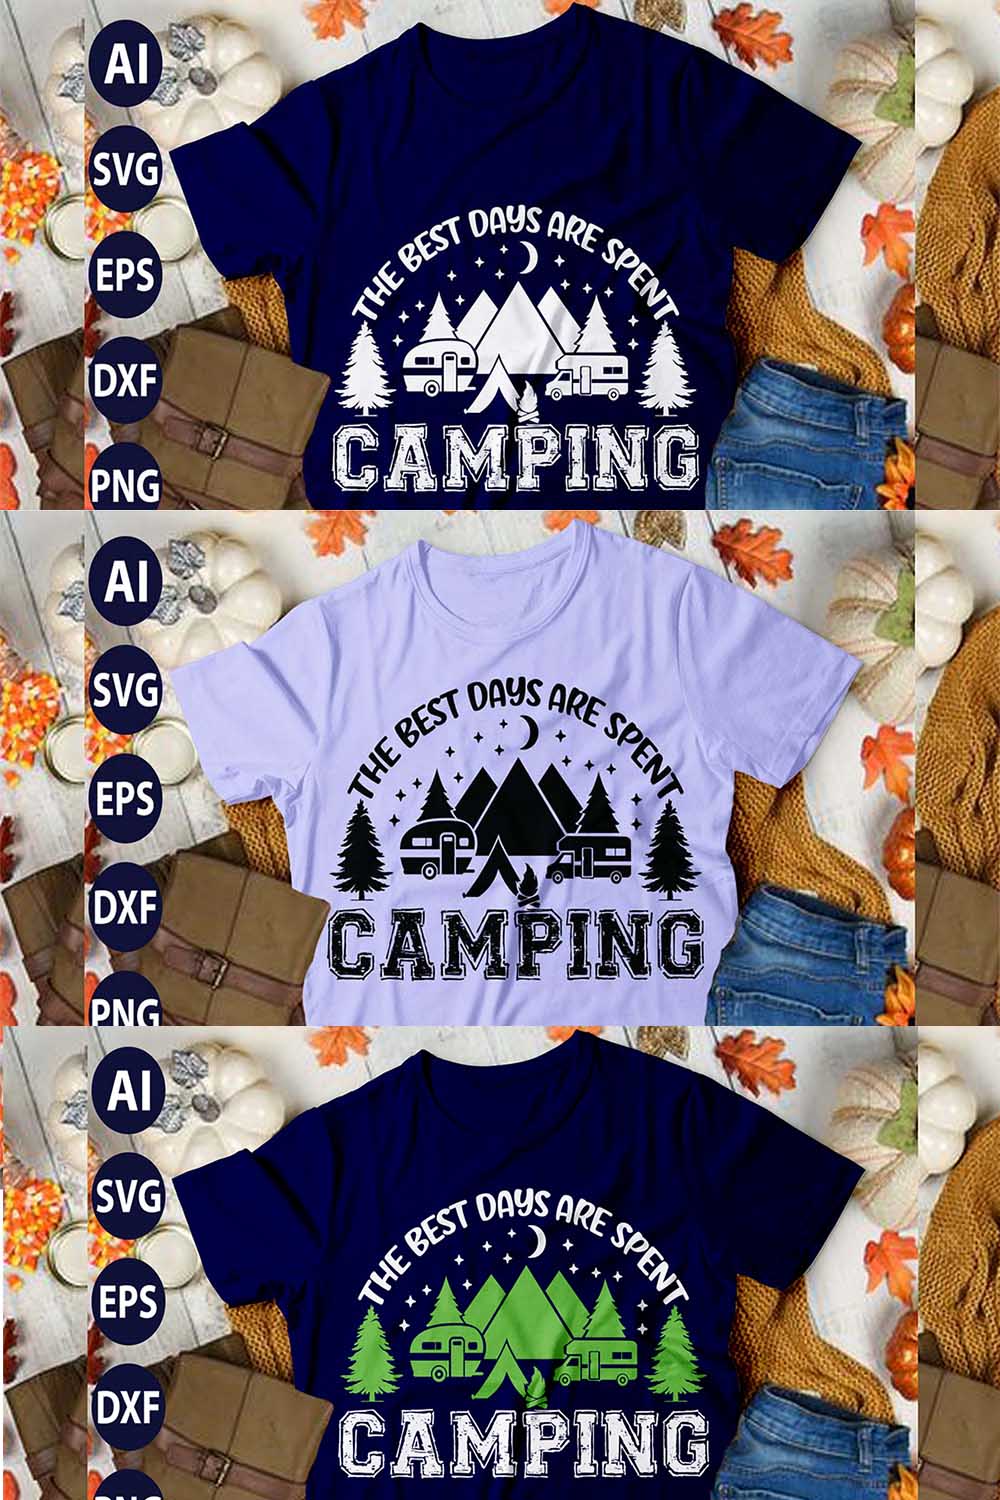 Best Days Are Spent Camping T-Shirt Design | Mountain Hike T-Shirt Design | Ai, Svg, Eps, Dxf, Jpeg, Png, Instant download T-Shirt Digital Prints file pinterest preview image.